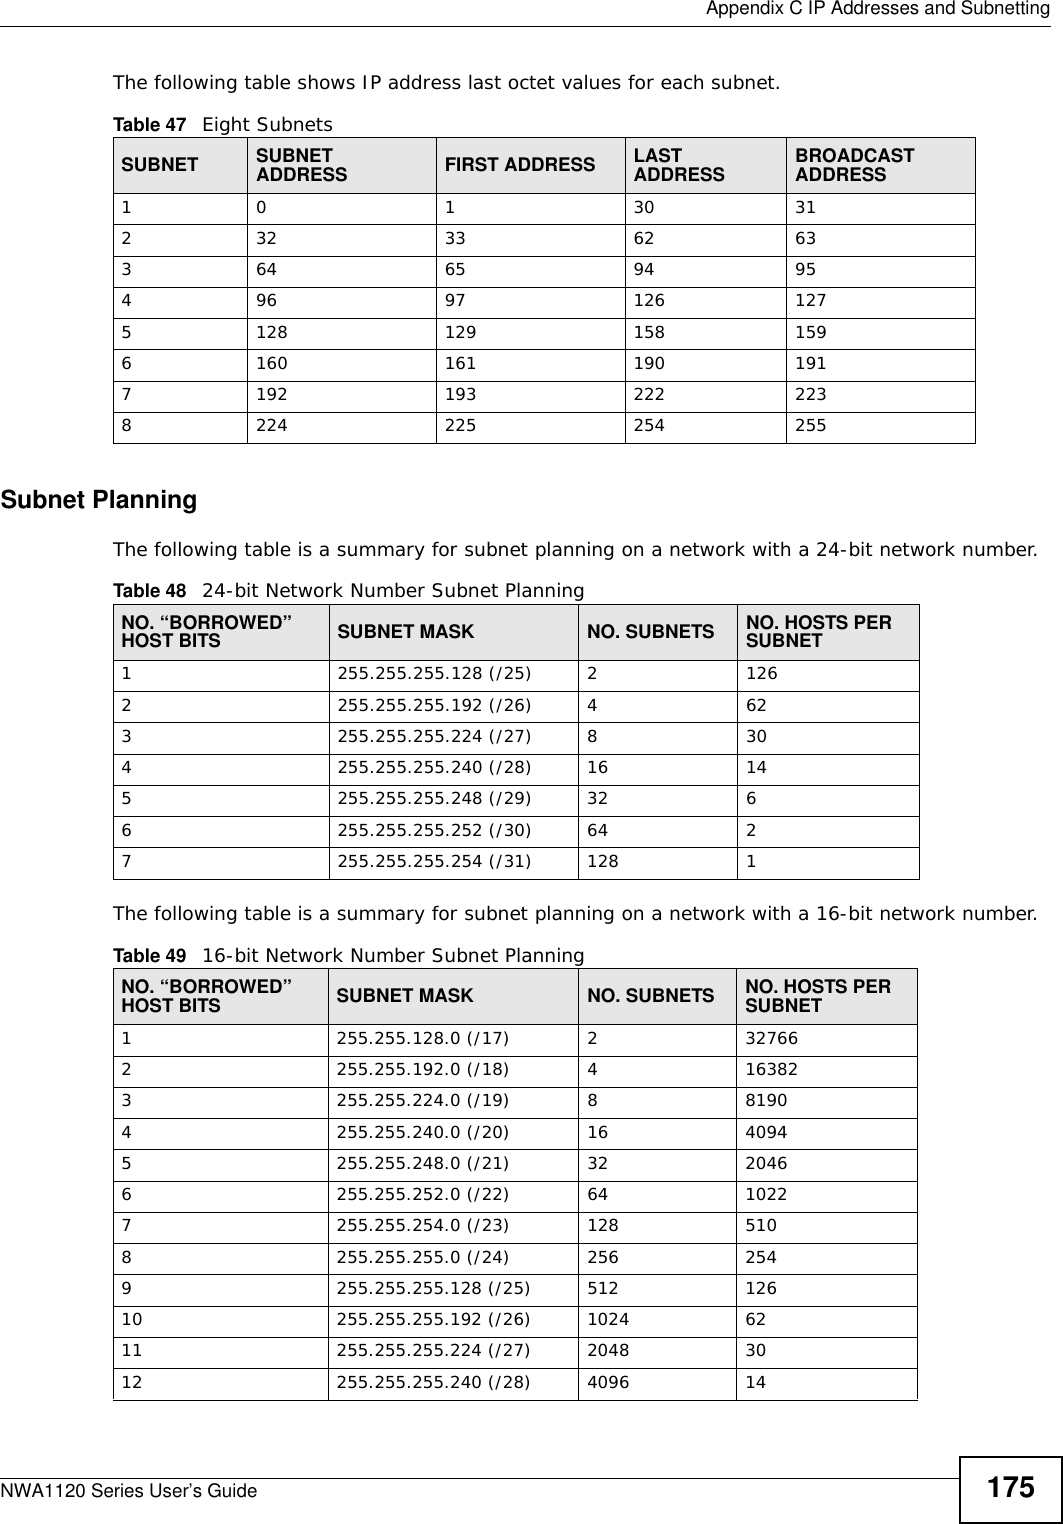  Appendix C IP Addresses and SubnettingNWA1120 Series User’s Guide 175The following table shows IP address last octet values for each subnet.Subnet PlanningThe following table is a summary for subnet planning on a network with a 24-bit network number.The following table is a summary for subnet planning on a network with a 16-bit network number. Table 47   Eight SubnetsSUBNET SUBNET ADDRESS FIRST ADDRESS LAST ADDRESS BROADCAST ADDRESS1 0 1 30 31232 33 62 63364 65 94 95496 97 126 1275128 129 158 1596160 161 190 1917192 193 222 2238224 225 254 255Table 48   24-bit Network Number Subnet PlanningNO. “BORROWED” HOST BITS SUBNET MASK NO. SUBNETS NO. HOSTS PER SUBNET1255.255.255.128 (/25) 21262255.255.255.192 (/26) 4623255.255.255.224 (/27) 8304255.255.255.240 (/28) 16 145255.255.255.248 (/29) 32 66255.255.255.252 (/30) 64 27255.255.255.254 (/31) 128 1Table 49   16-bit Network Number Subnet PlanningNO. “BORROWED” HOST BITS SUBNET MASK NO. SUBNETS NO. HOSTS PER SUBNET1255.255.128.0 (/17) 2327662255.255.192.0 (/18) 4163823255.255.224.0 (/19) 881904255.255.240.0 (/20) 16 40945255.255.248.0 (/21) 32 20466255.255.252.0 (/22) 64 10227255.255.254.0 (/23) 128 5108255.255.255.0 (/24) 256 2549255.255.255.128 (/25) 512 12610 255.255.255.192 (/26) 1024 6211 255.255.255.224 (/27) 2048 3012 255.255.255.240 (/28) 4096 14